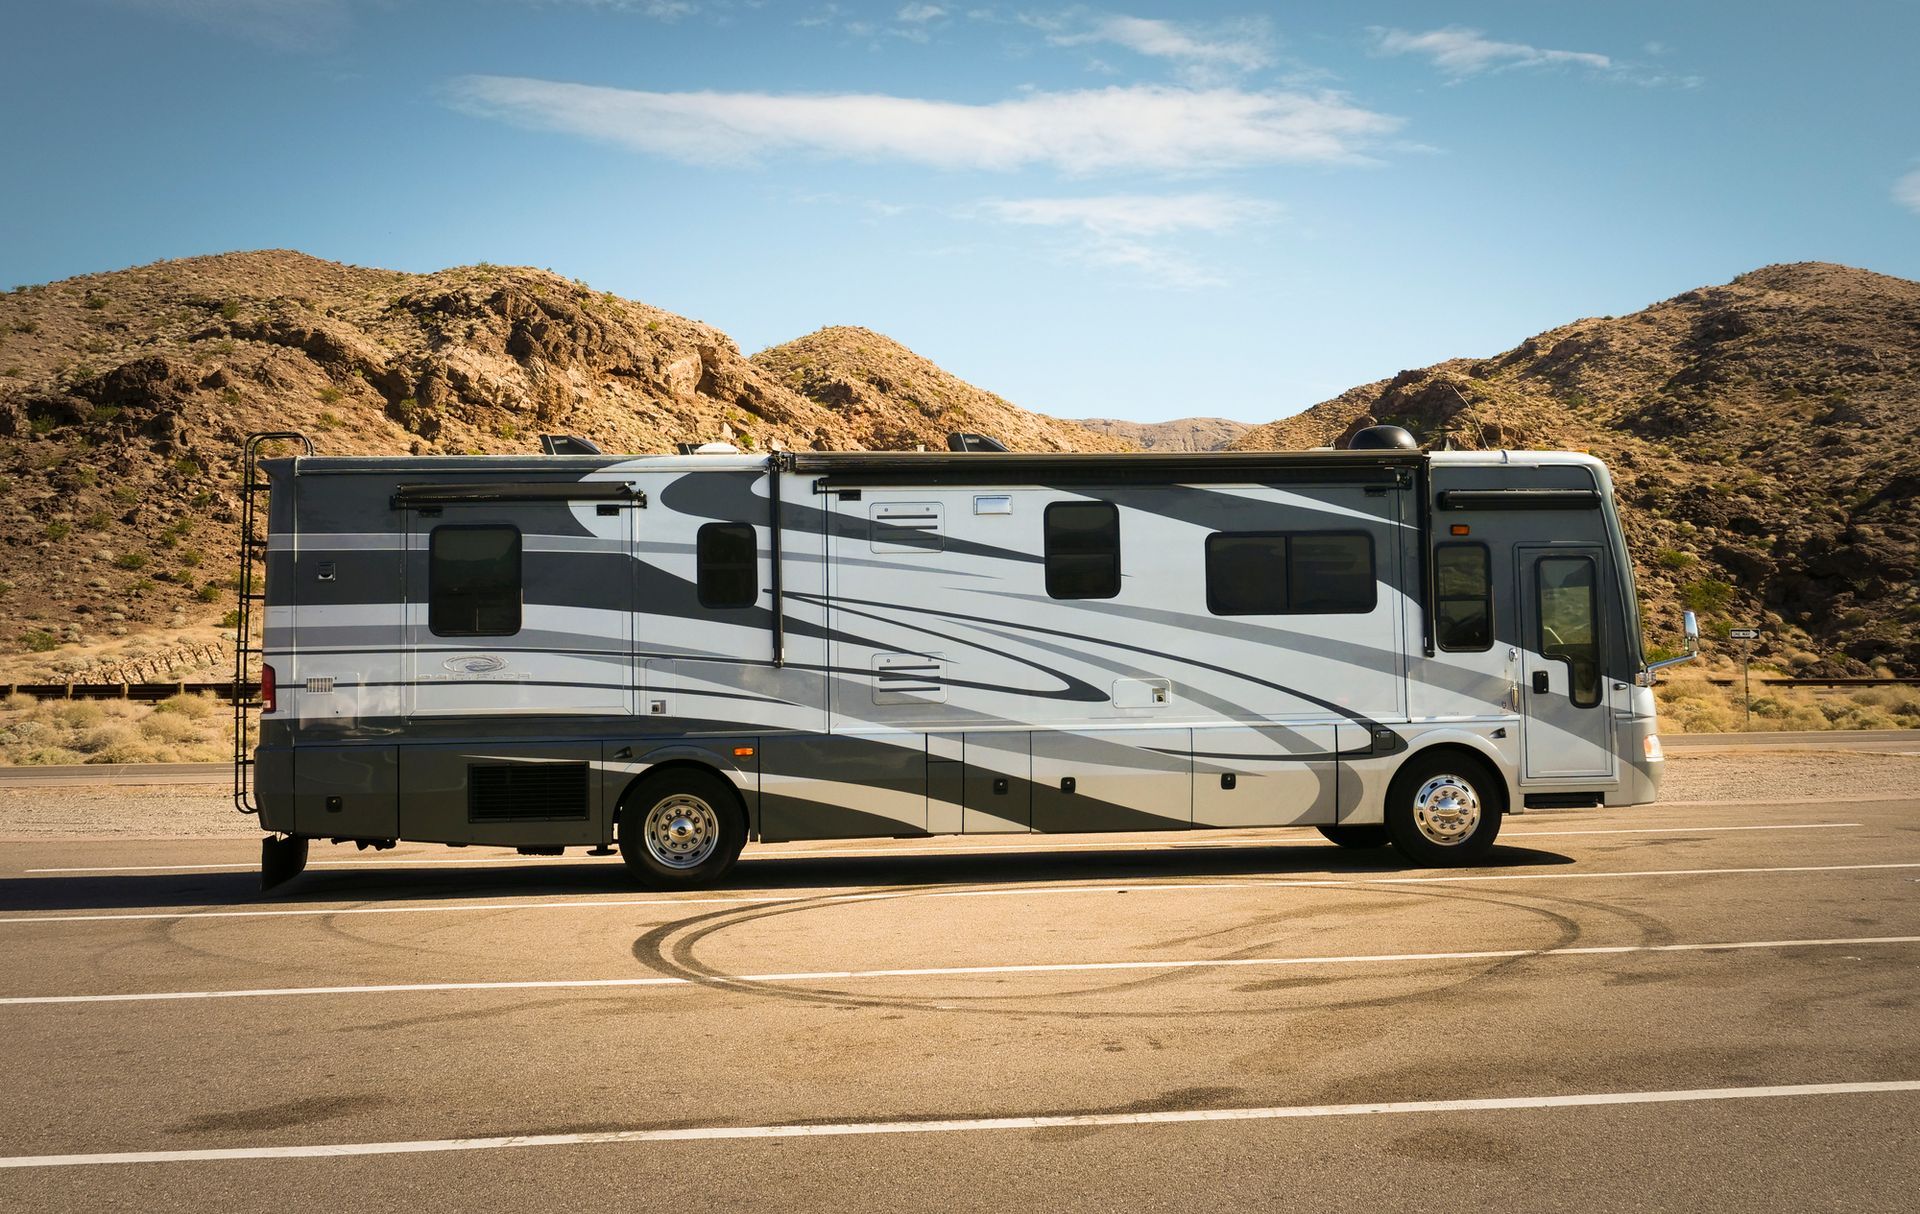 A large rv is parked on the side of the road in the desert.